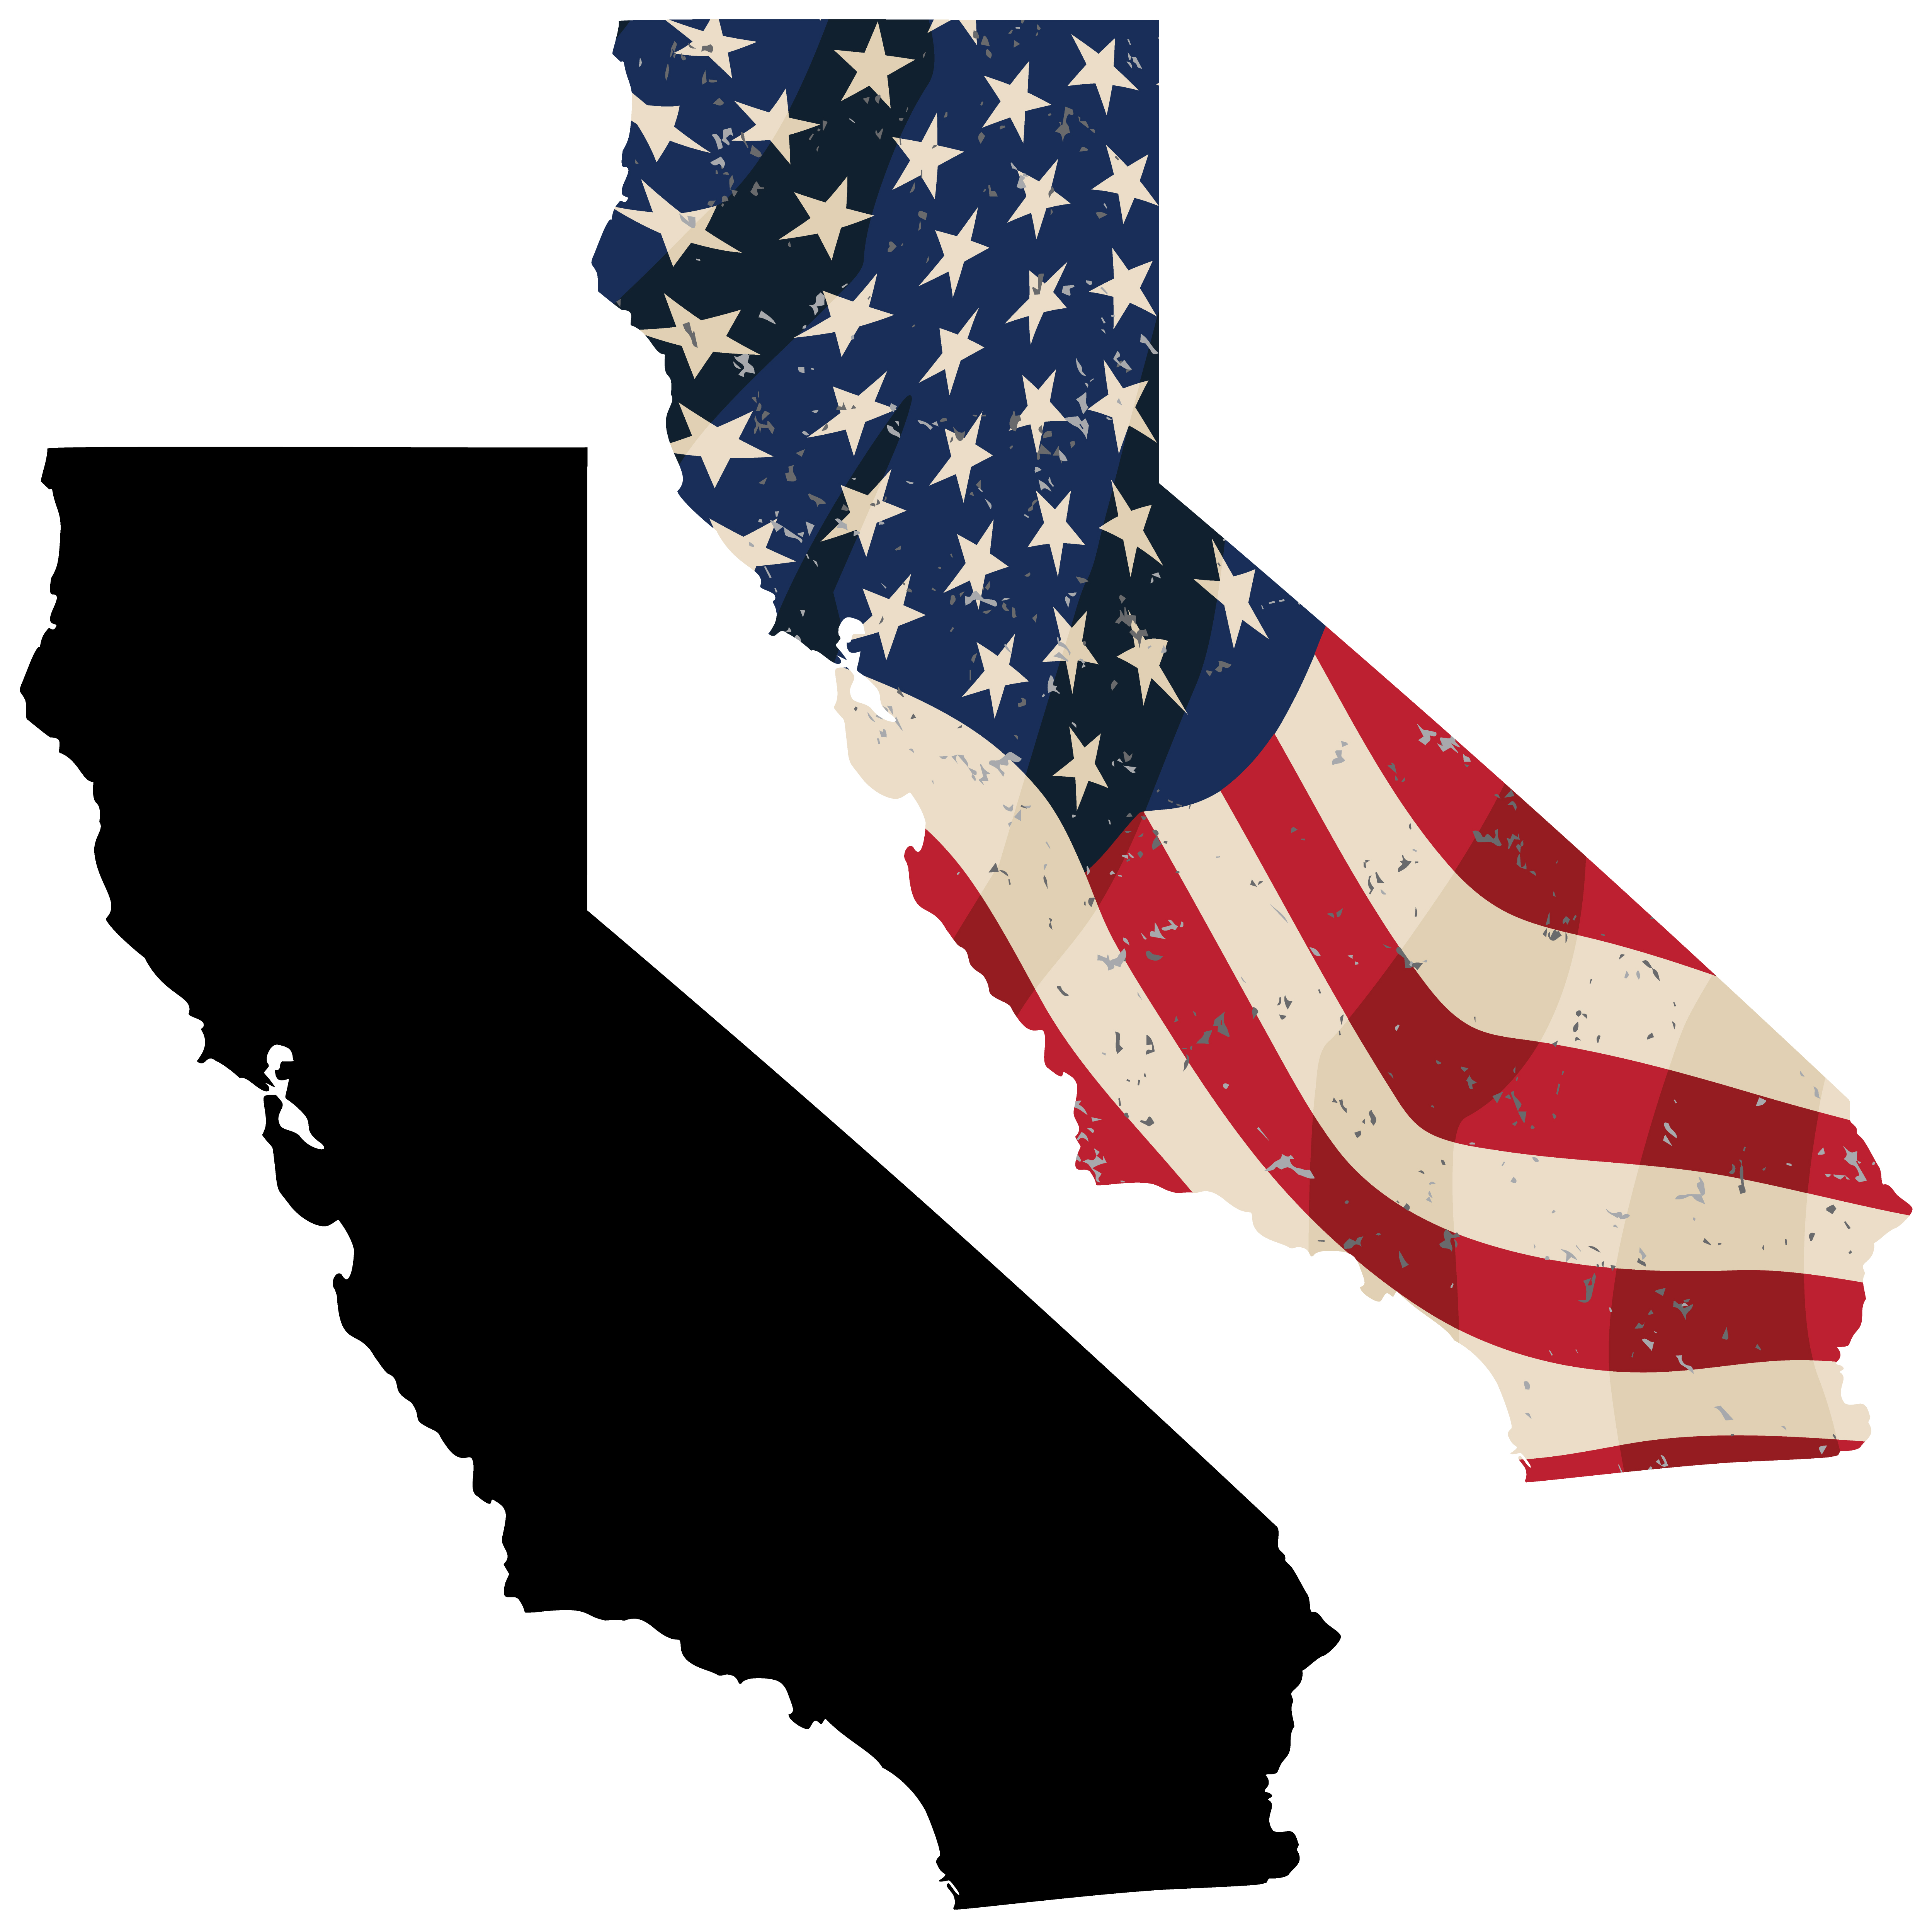 Download California with aged USA flag embedded - Download Free Vectors, Clipart Graphics & Vector Art